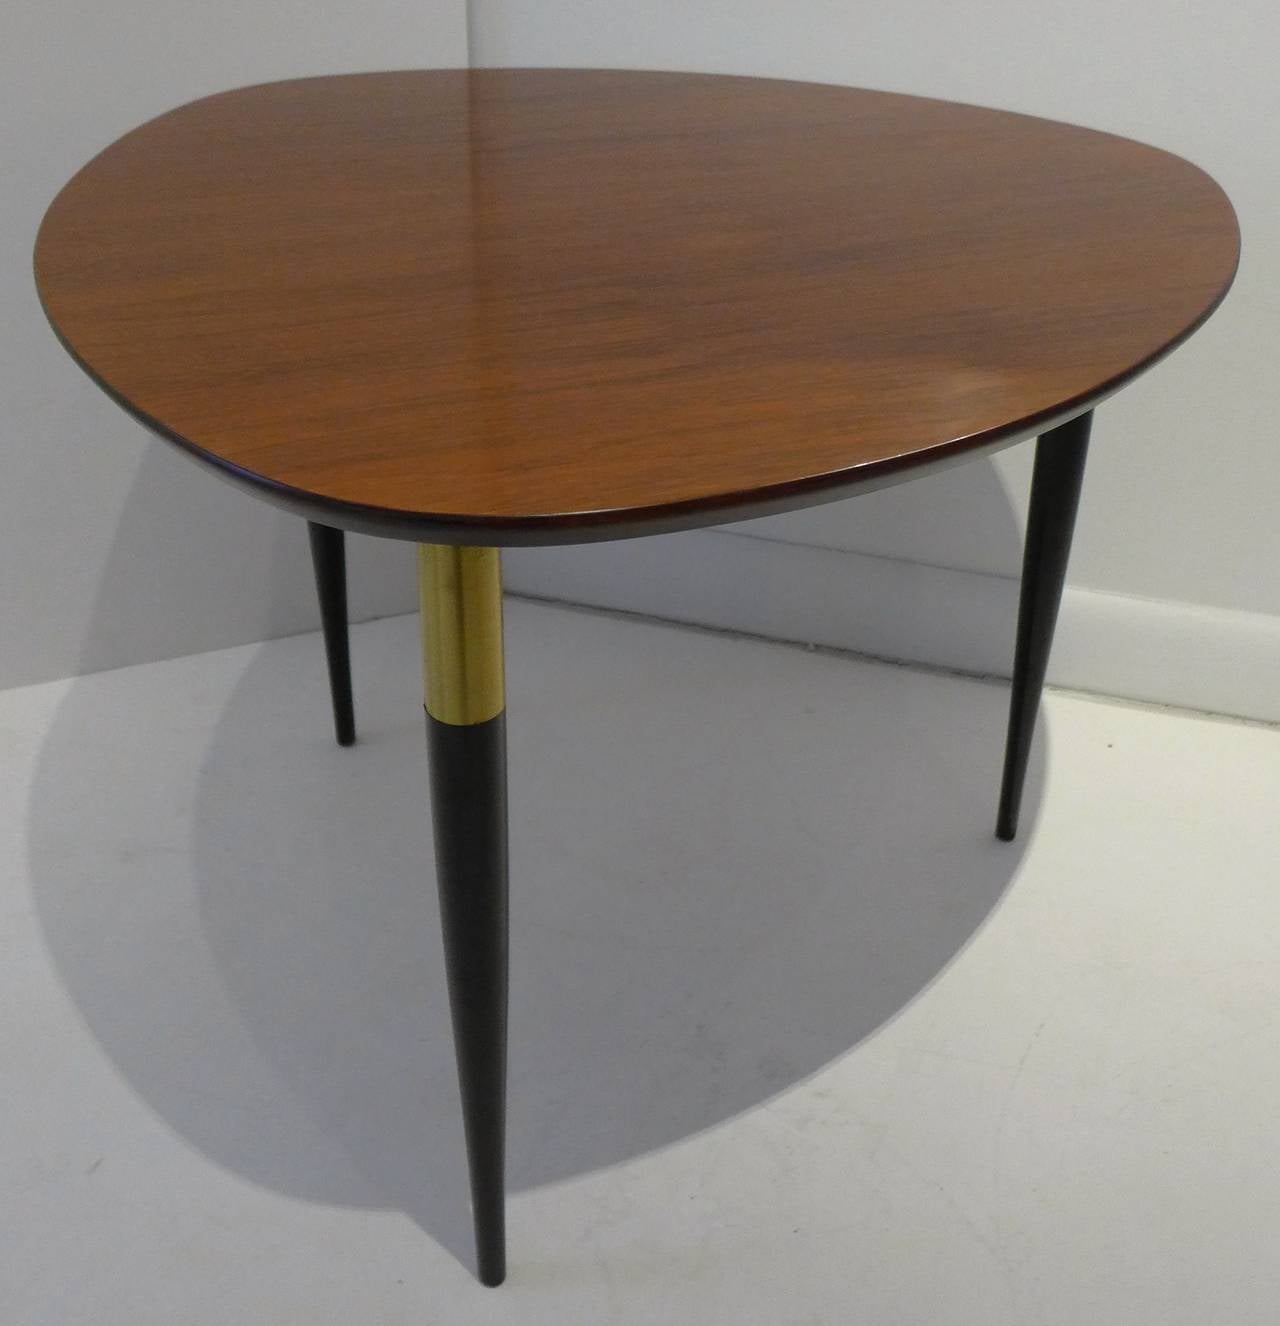 Mid-20th Century Erno Fabry Nest of Tables with Exotic Wood Inlay